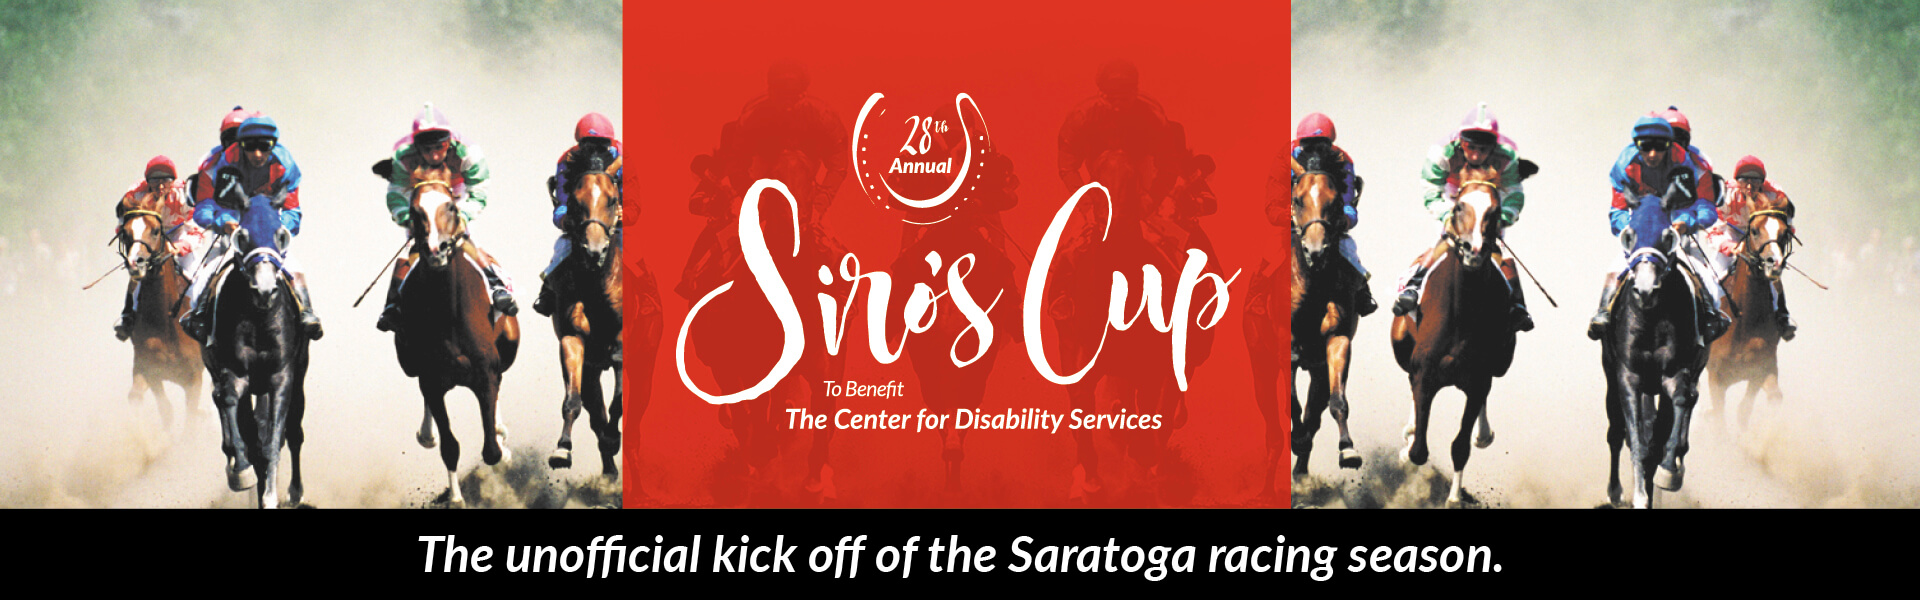 Siro's Cup Center for Disability Services Where people get better